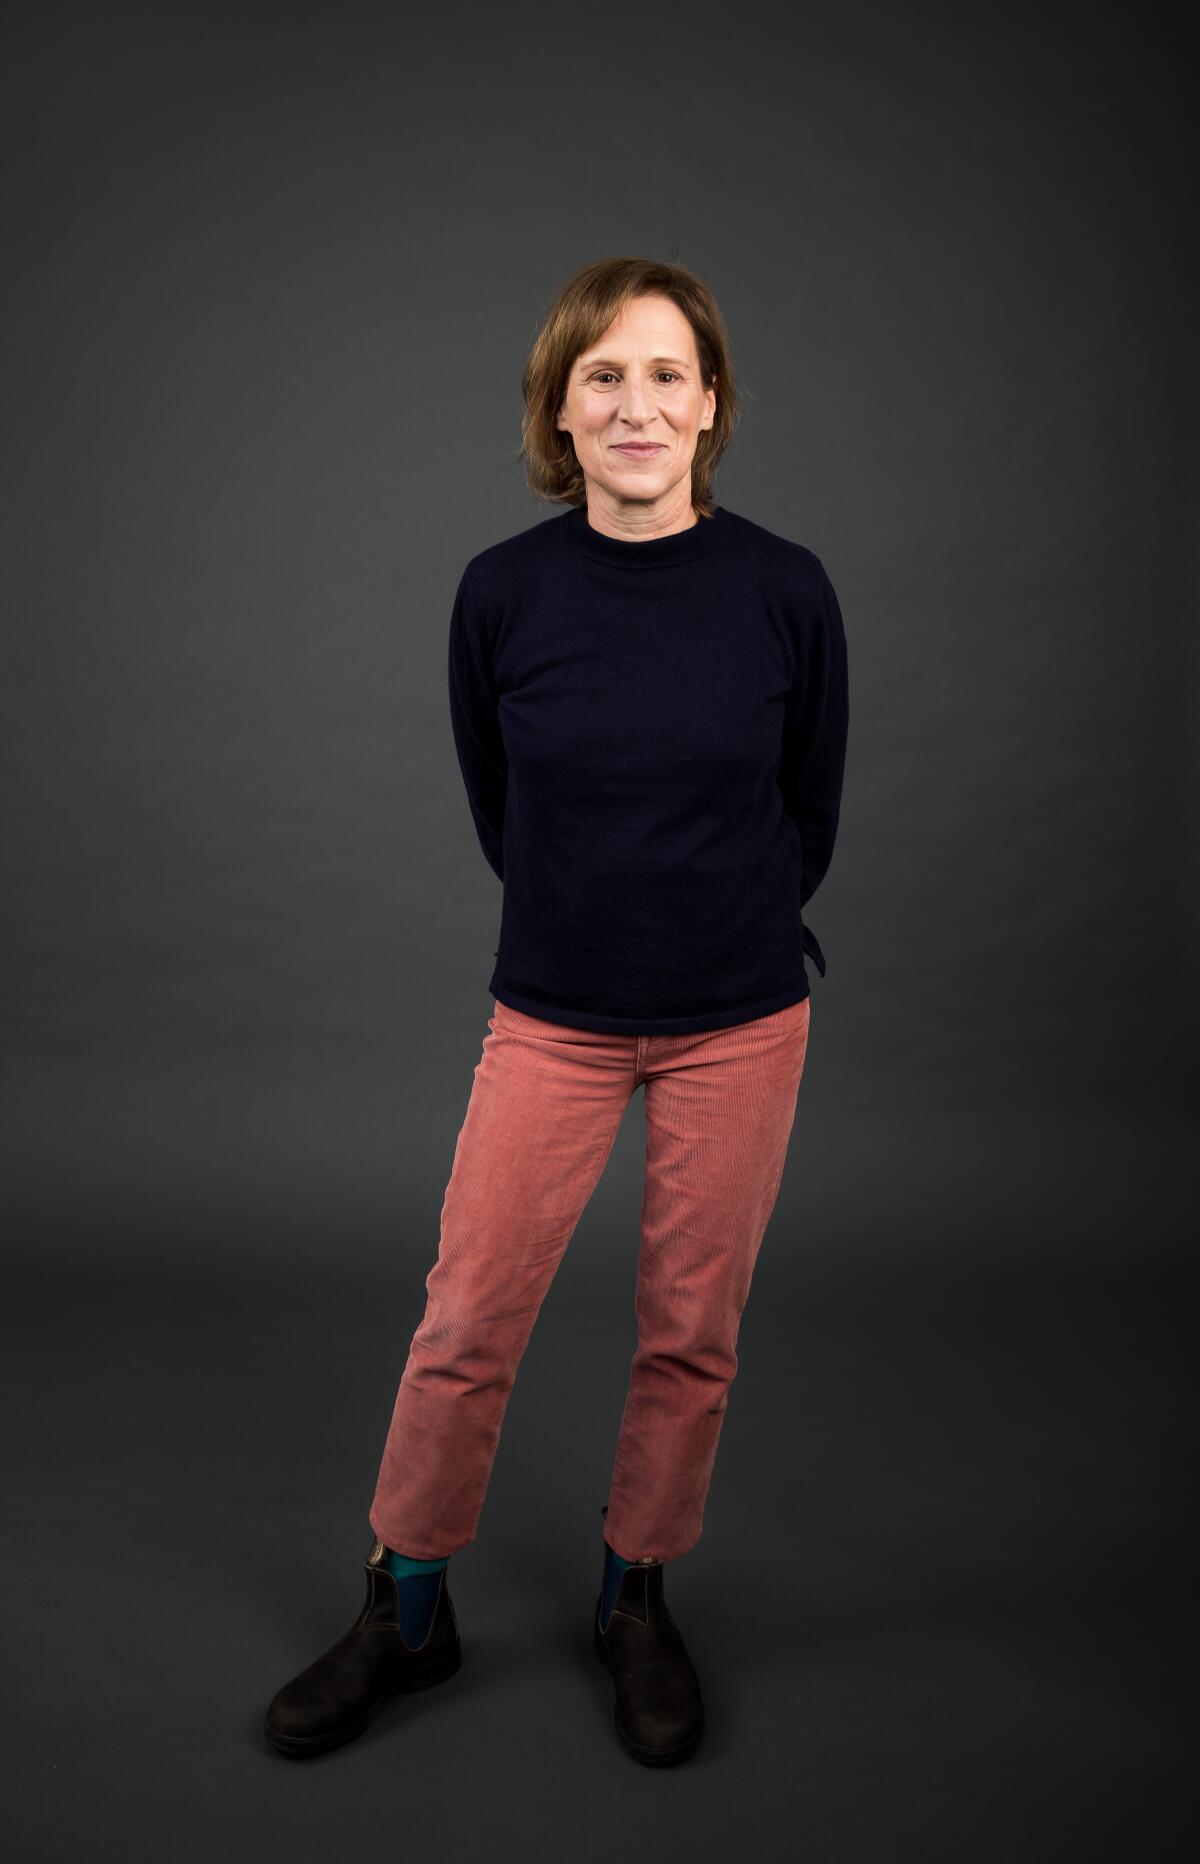 "First Cow" filmmaker Kelly Reichardt poses for a portrait on February 25, 2020, in New York City at the offices of A24.